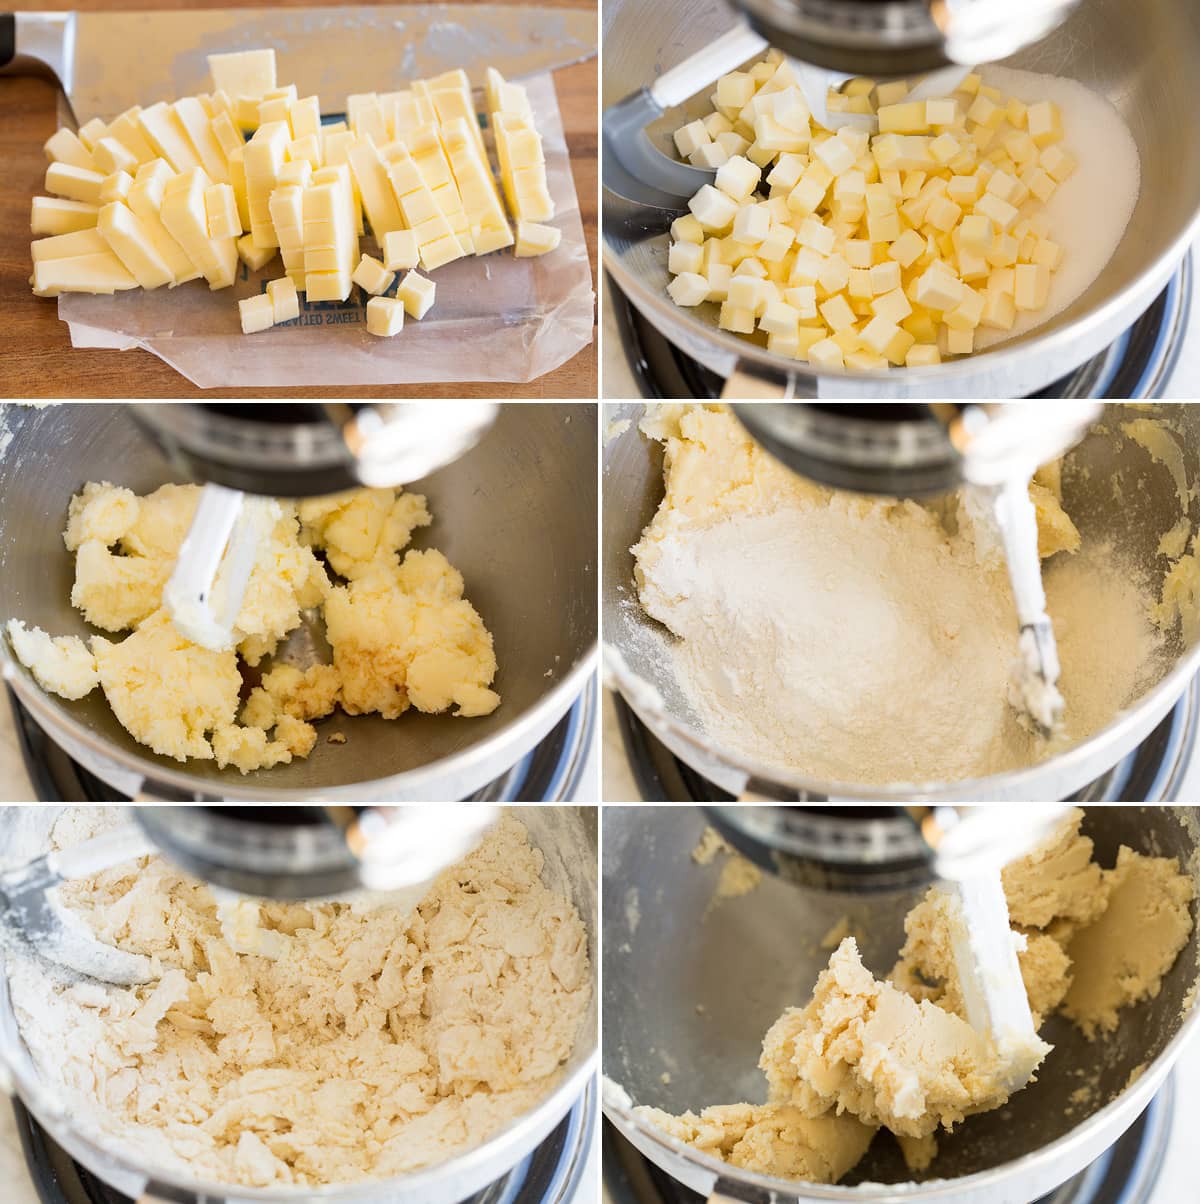 Collage of six images showing how to make shortbread cookies. Shows cutting cold butter into cubes, then mixing with sugar in a stand mixer. Then flour is added and mixed until it comes together.